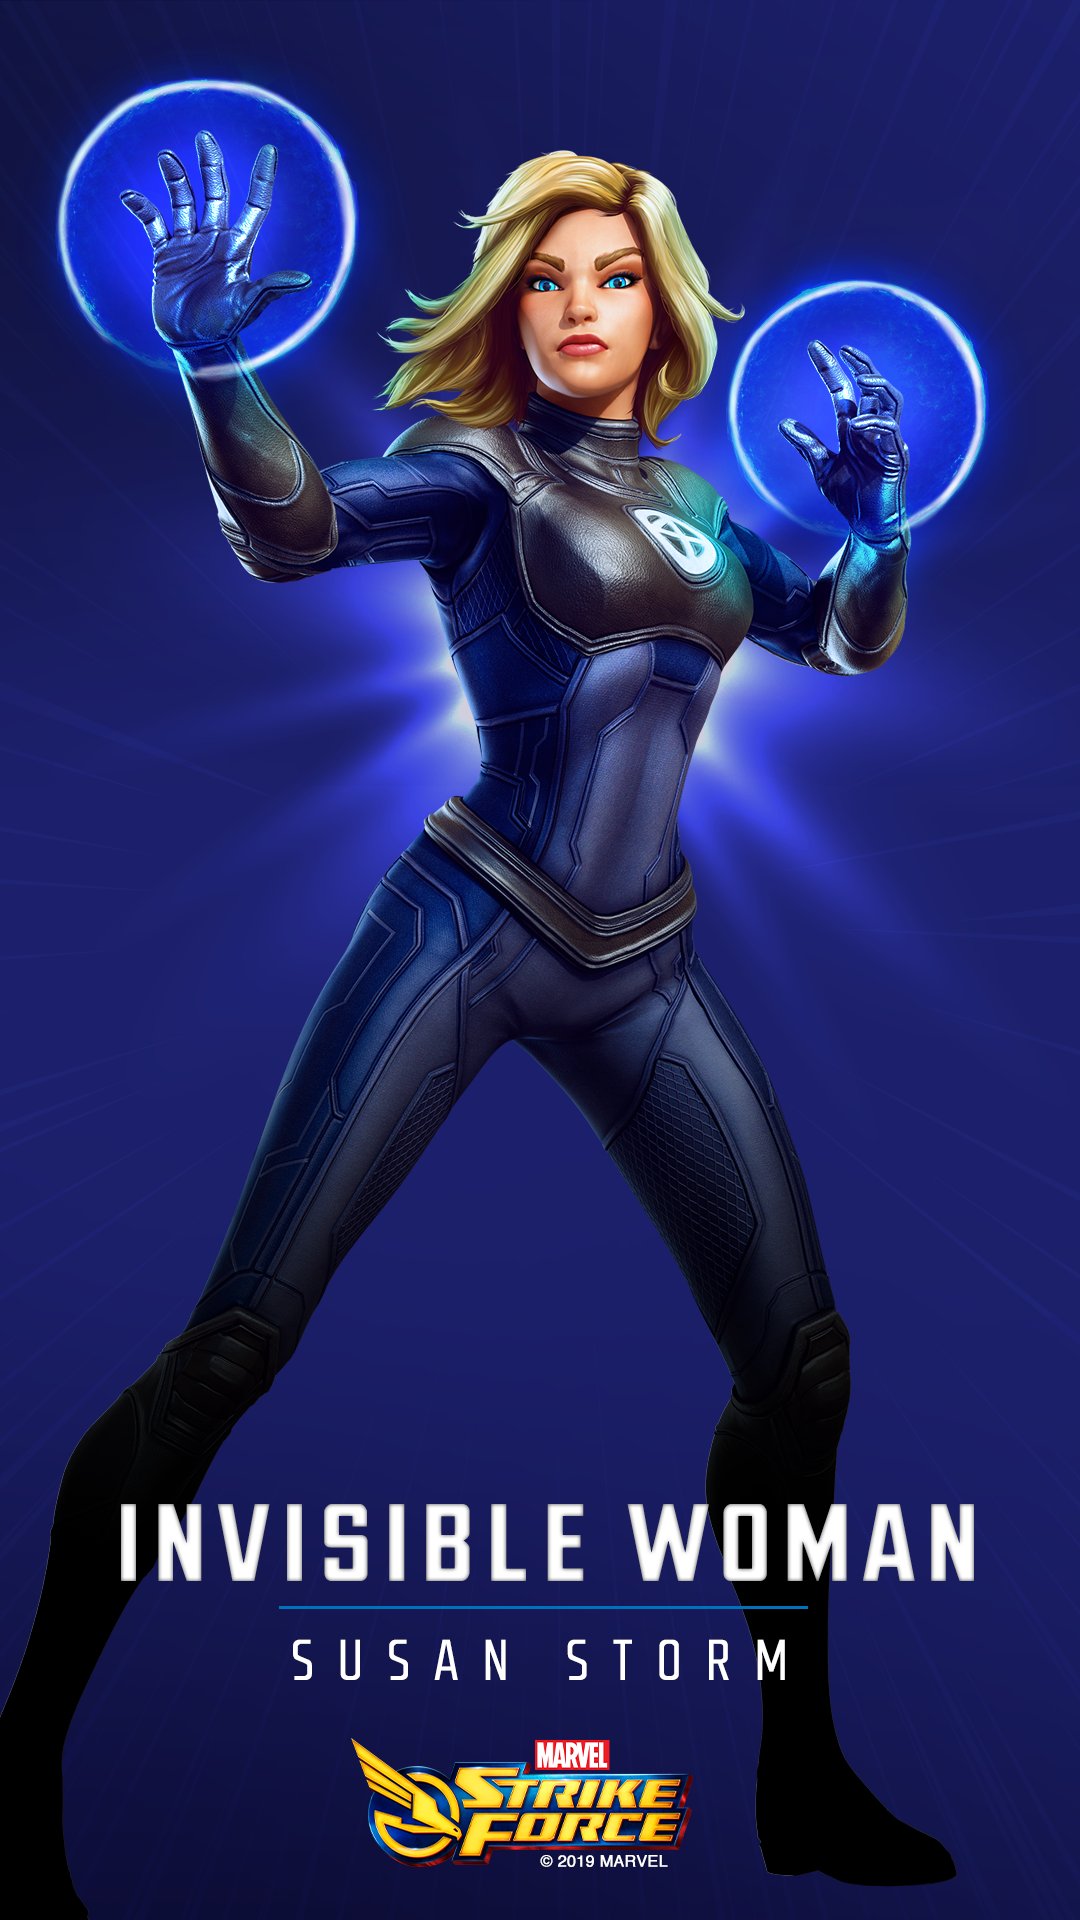 MARVEL Strike Force 4 mobile wallpaper now. Invisible Woman event later today. Ready?